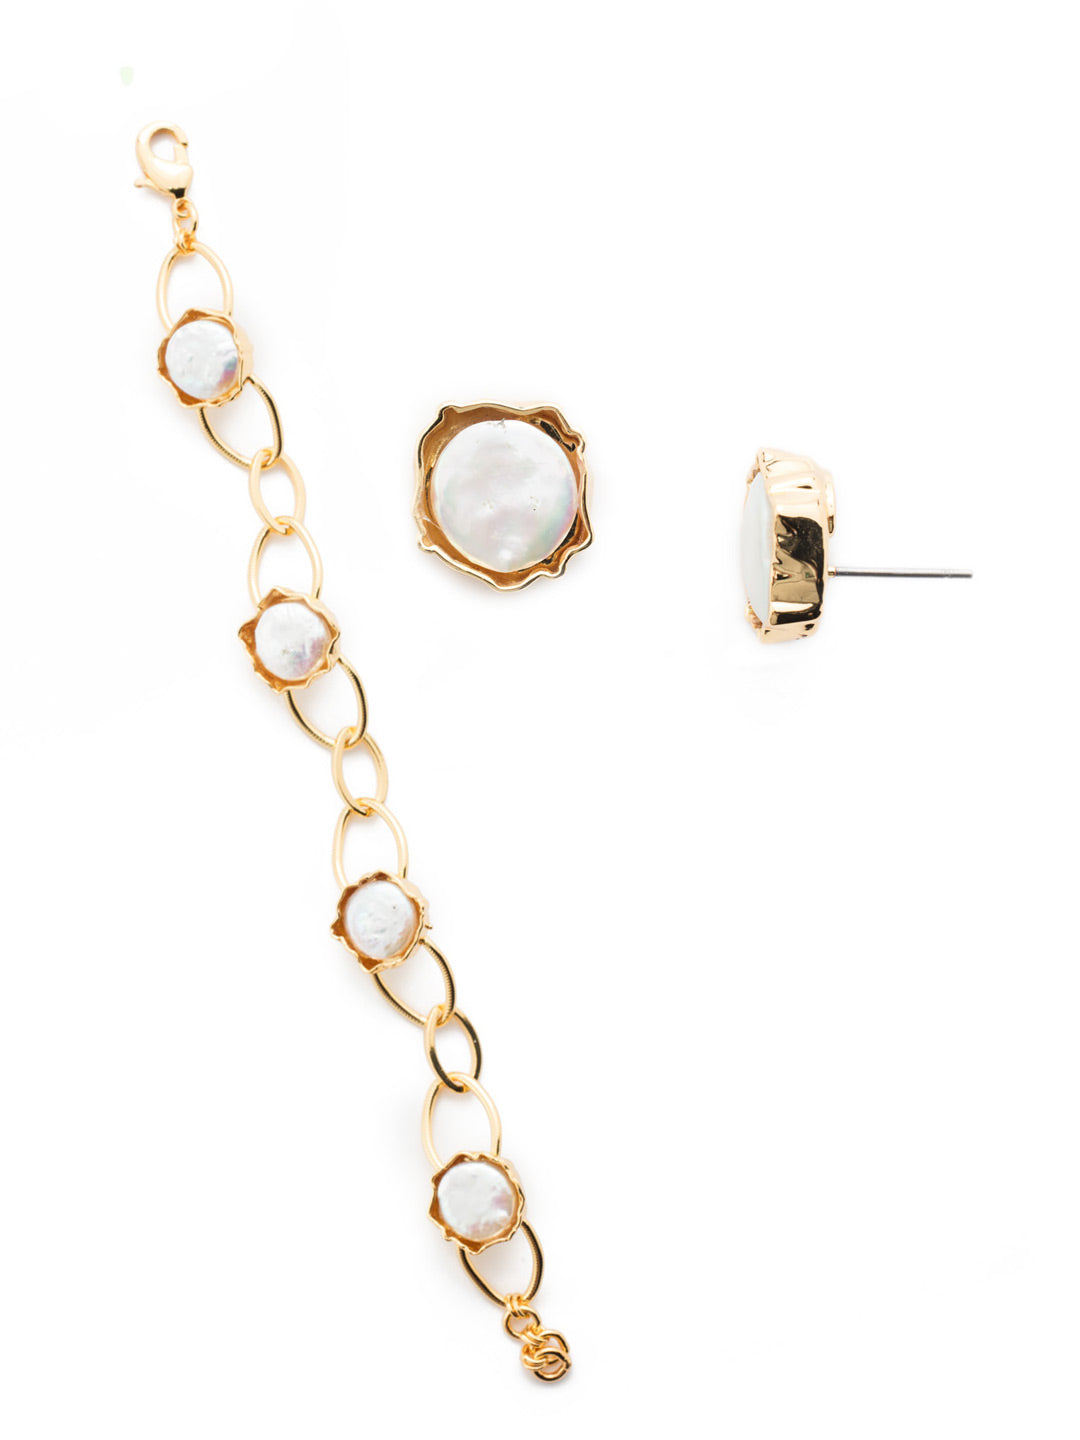 Diana Earrings/Bracelet Gift Set - GCT107BGMDP - <p>The Diana Gift Set with freshwater pearls encased in a ruffed metalwork in this bracelet and earring set. From Sorrelli's Modern Pearl collection in our Bright Gold-tone finish.</p>